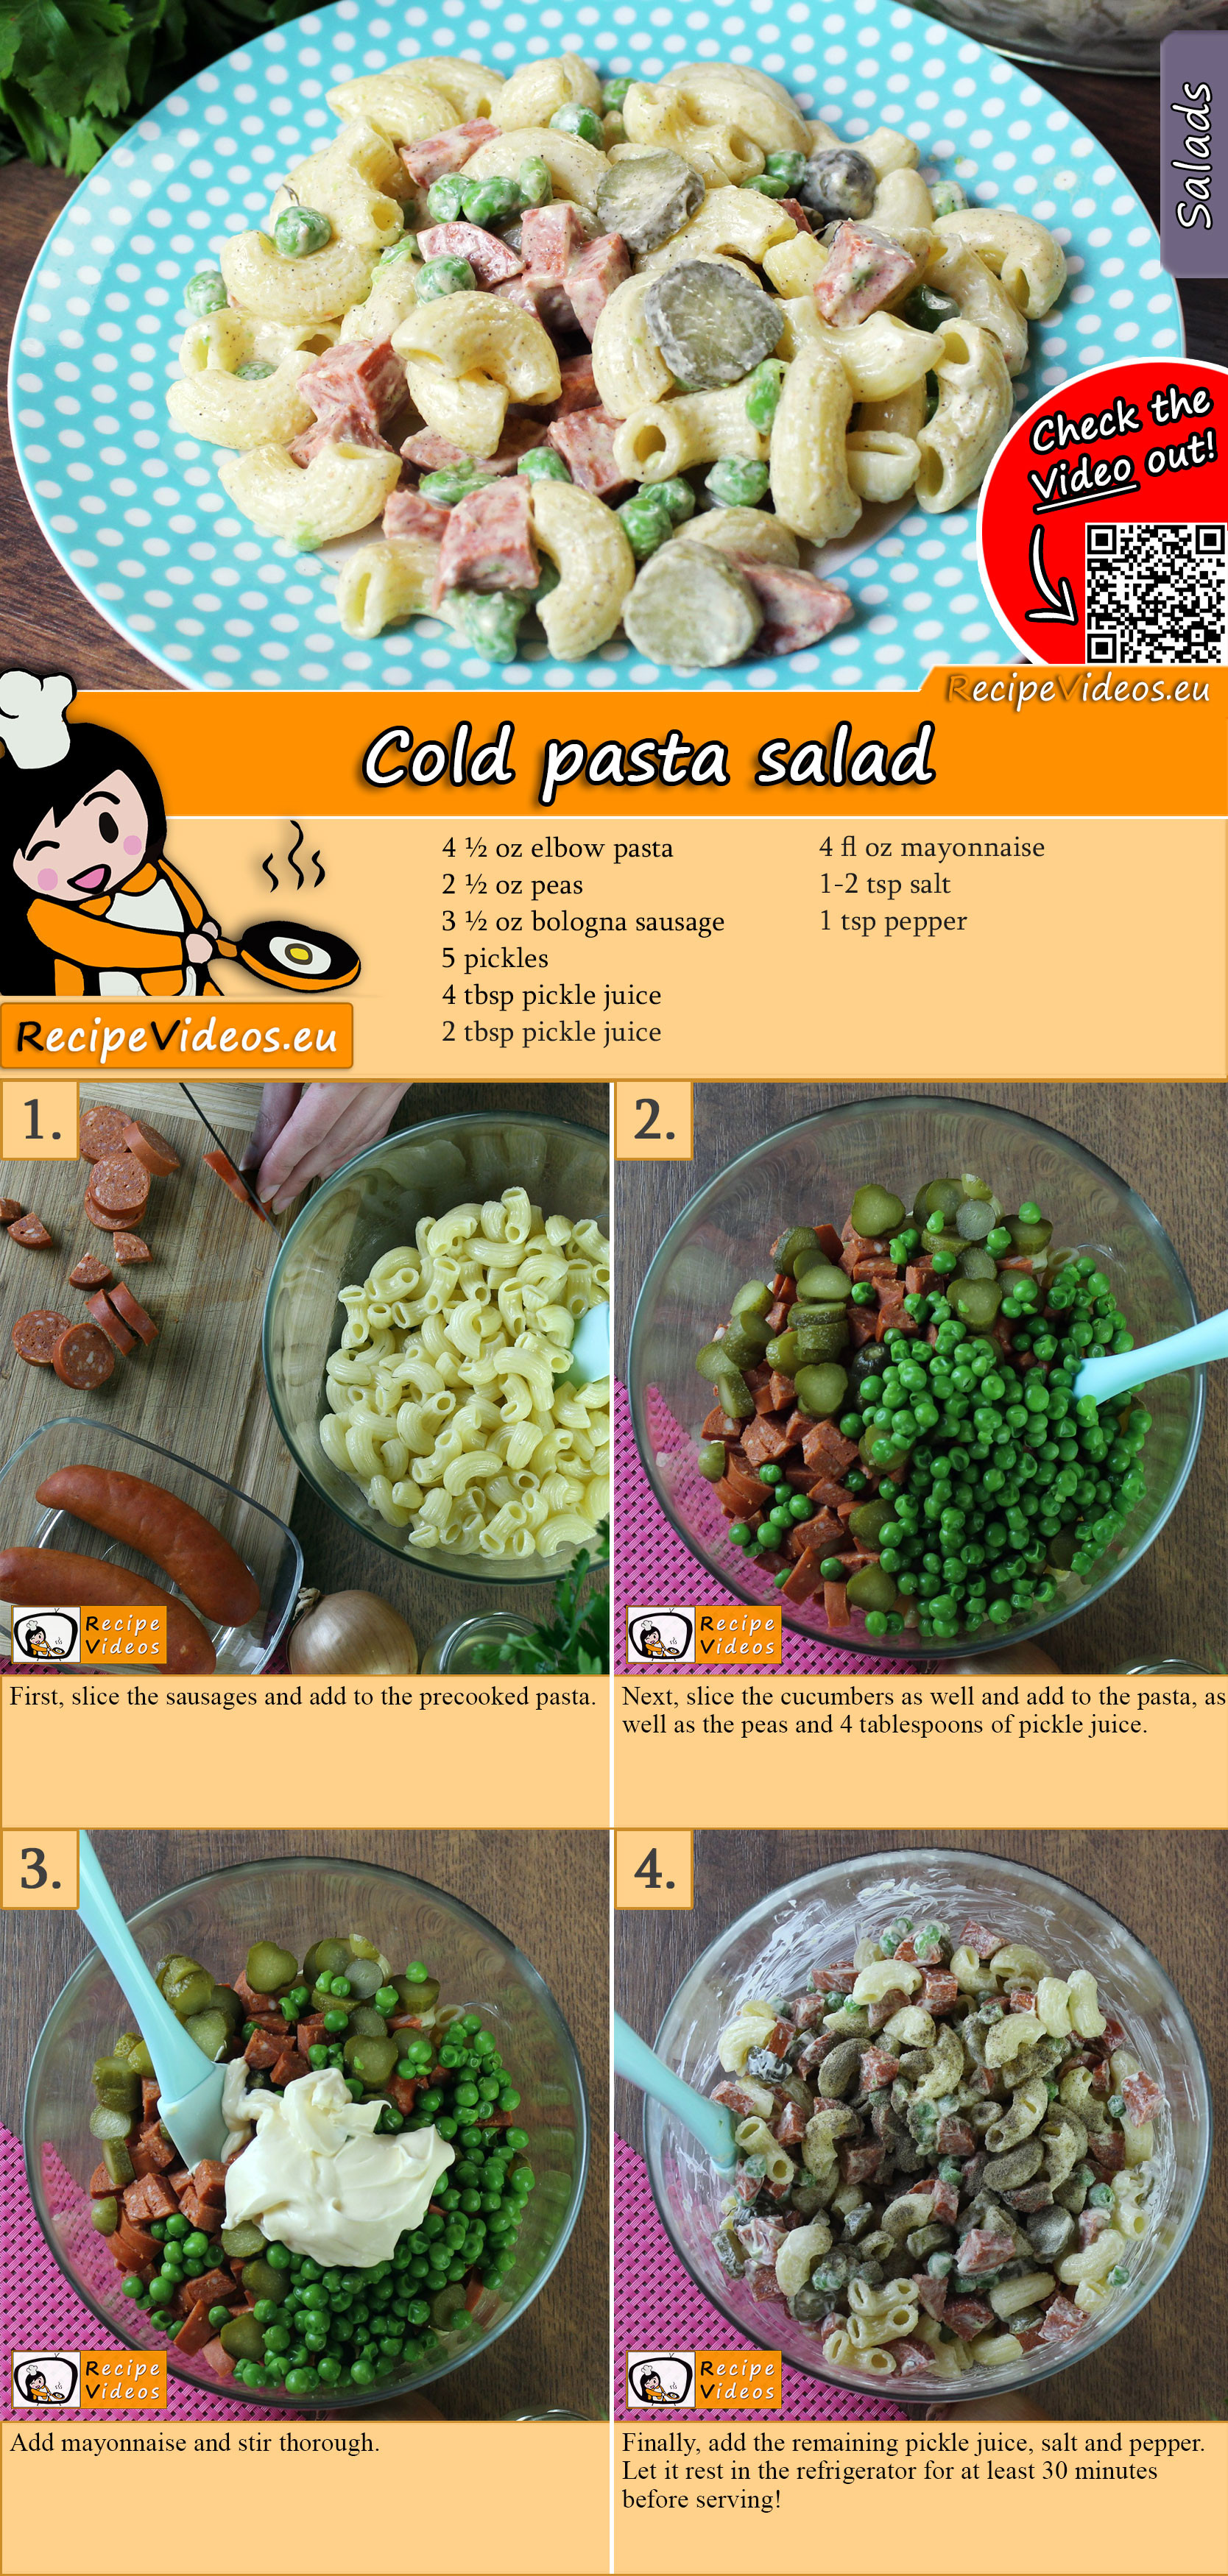 Cold pasta salad recipe with video